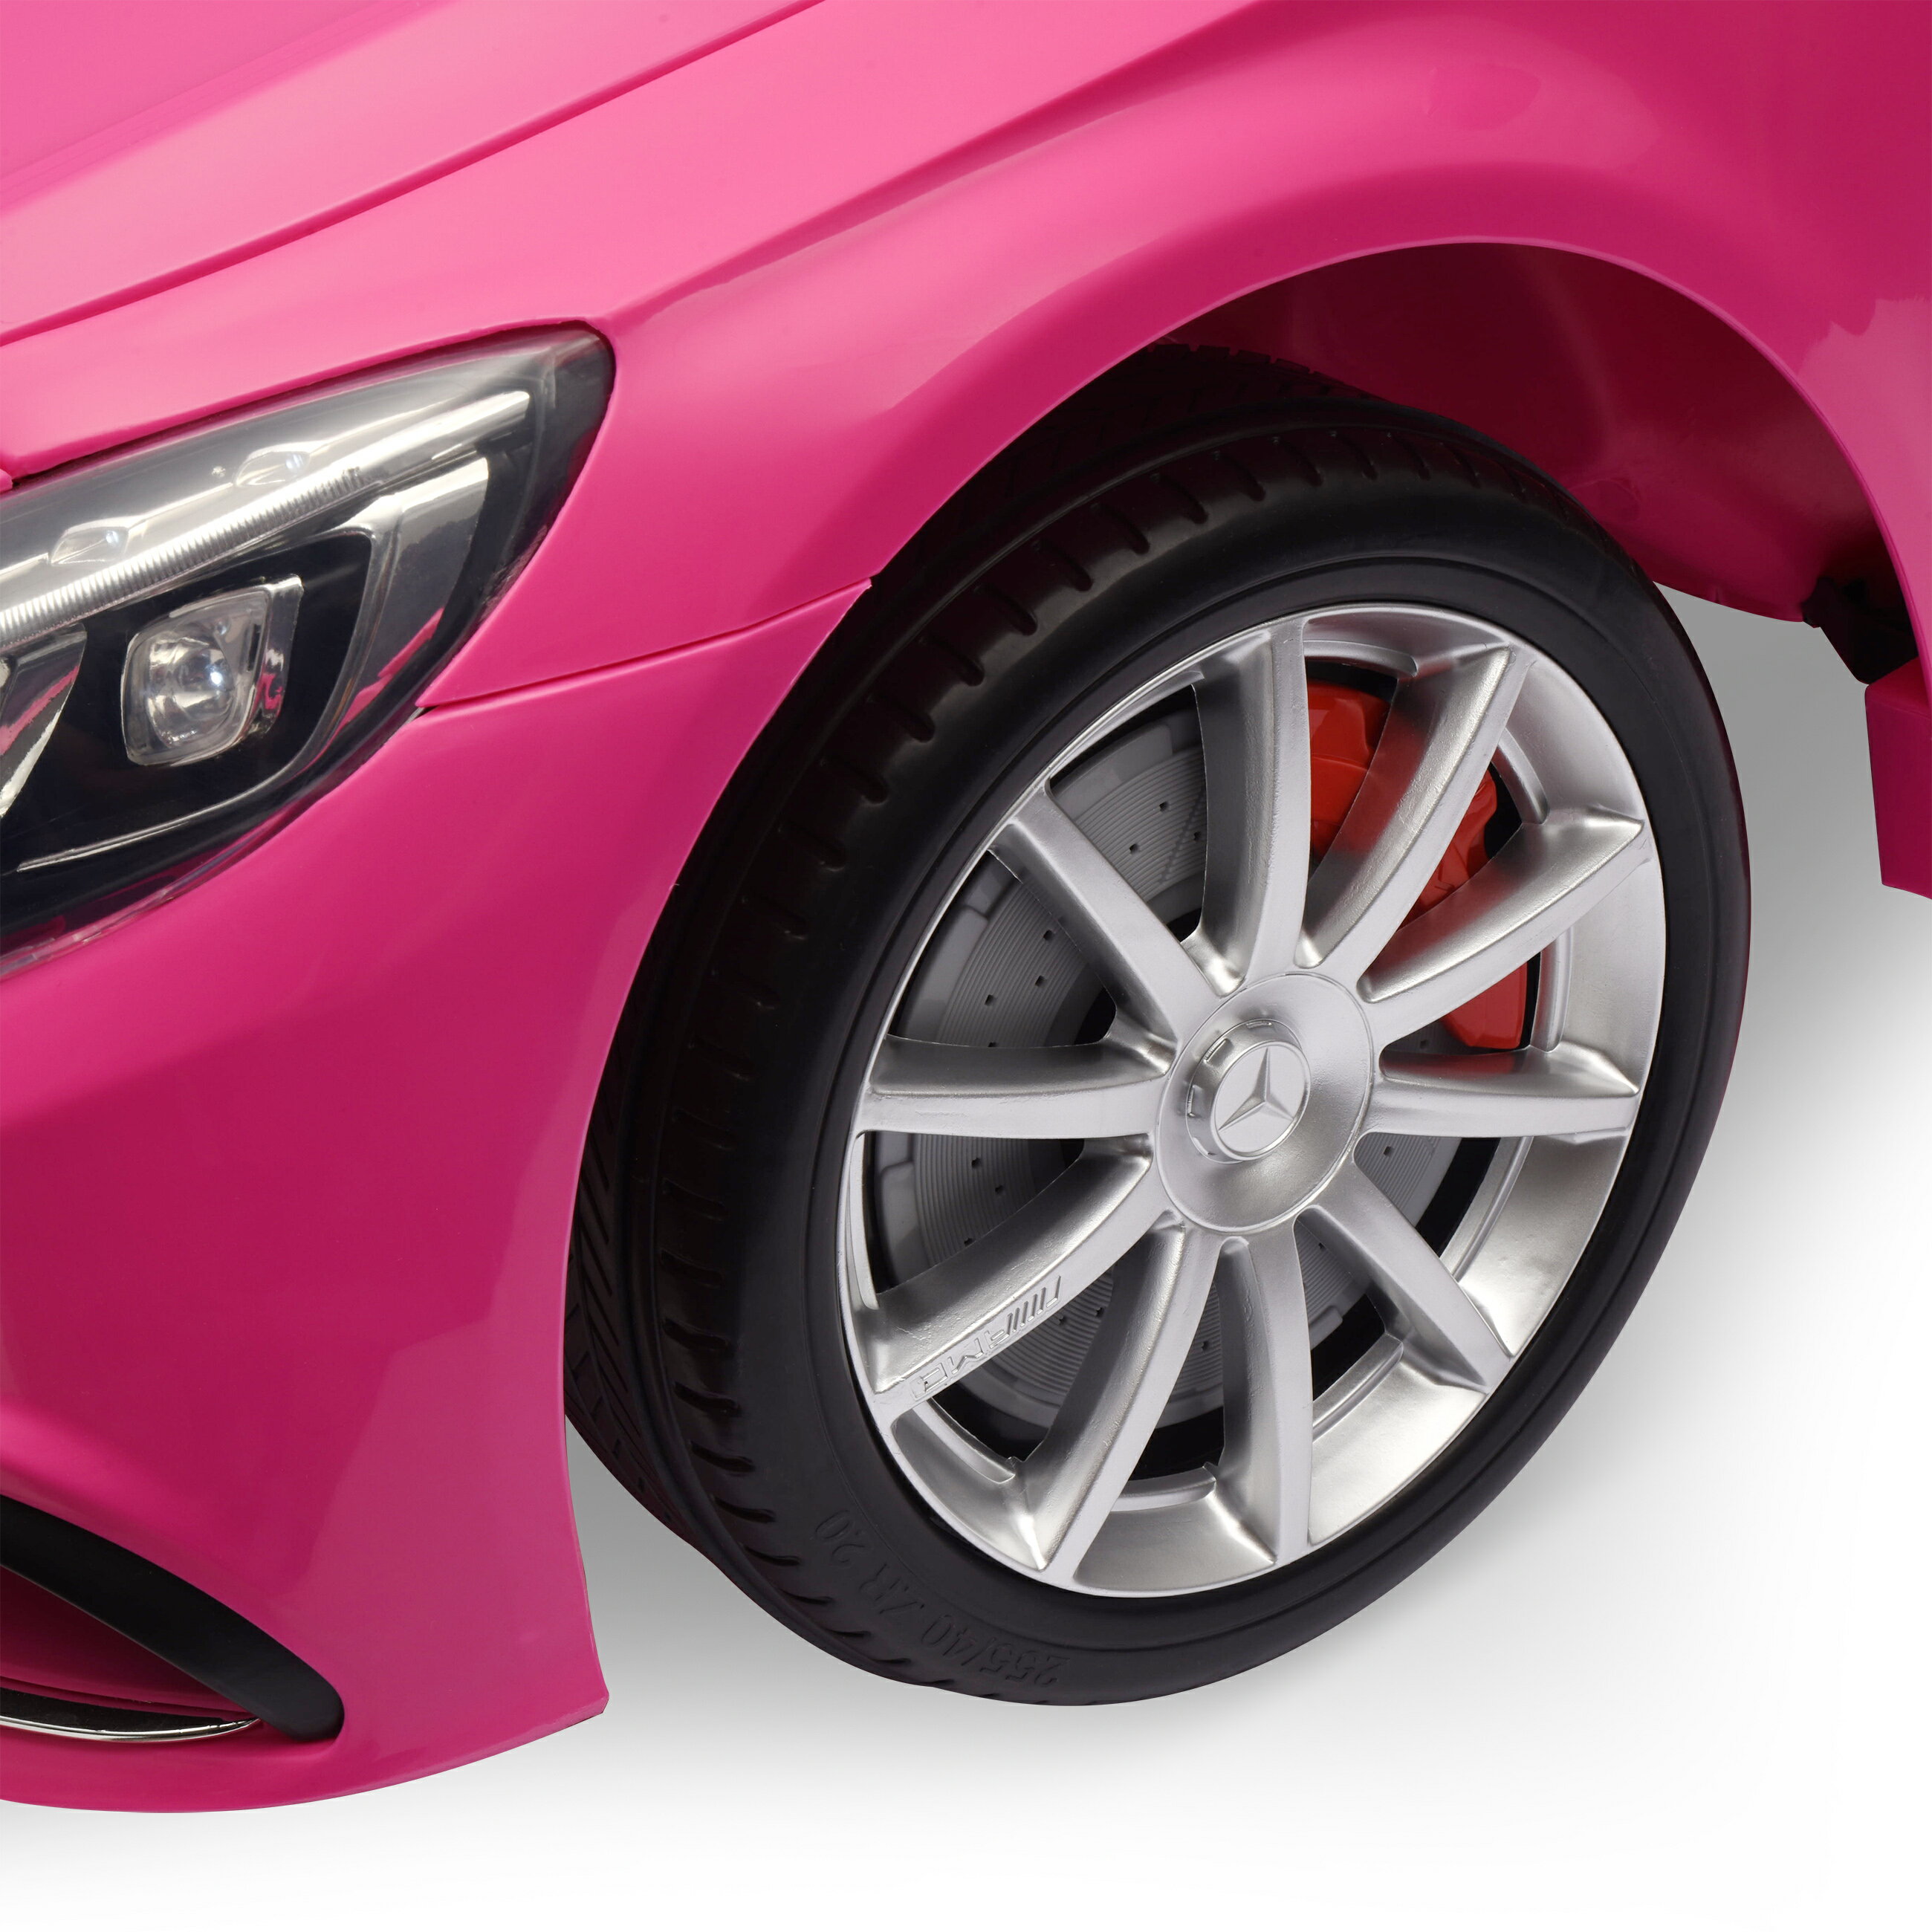 best choice products pink mercedes